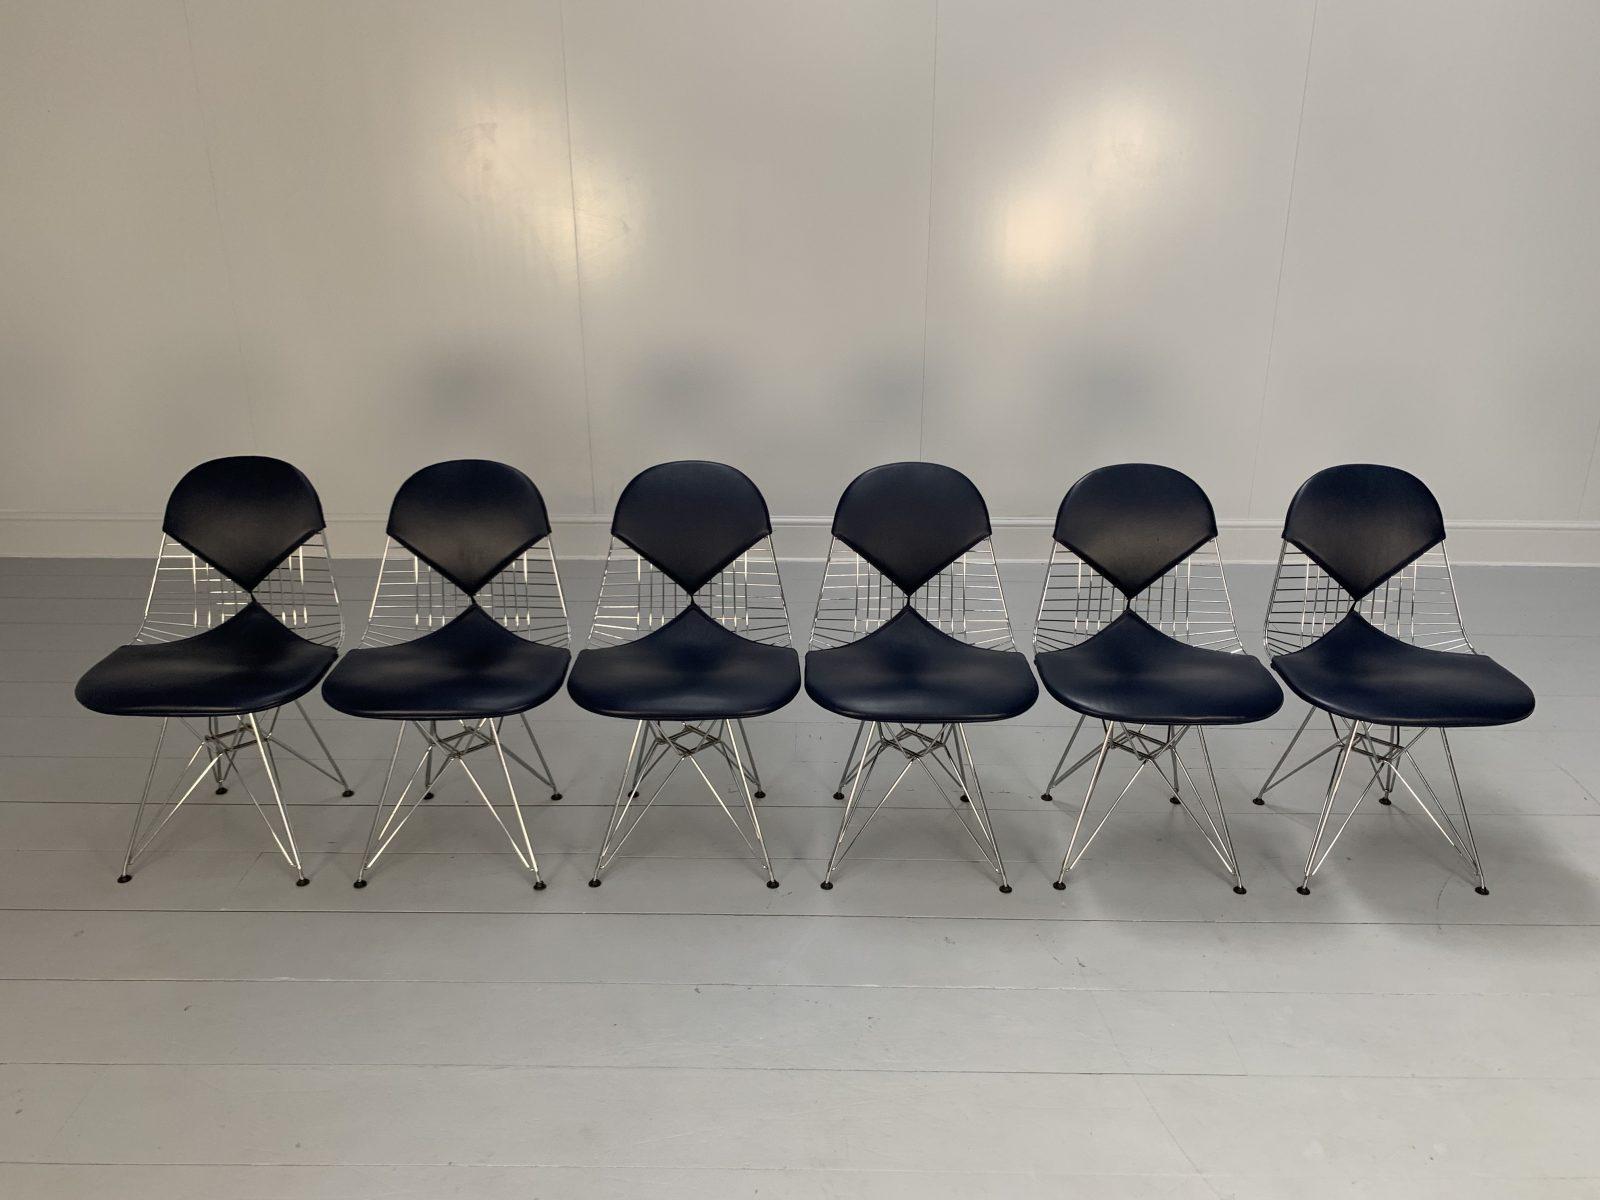 Suite of 6 Vitra “Eames DKR-2 Bikini” Chairs in Navy Blue Premium Leather In Good Condition For Sale In Barrowford, GB